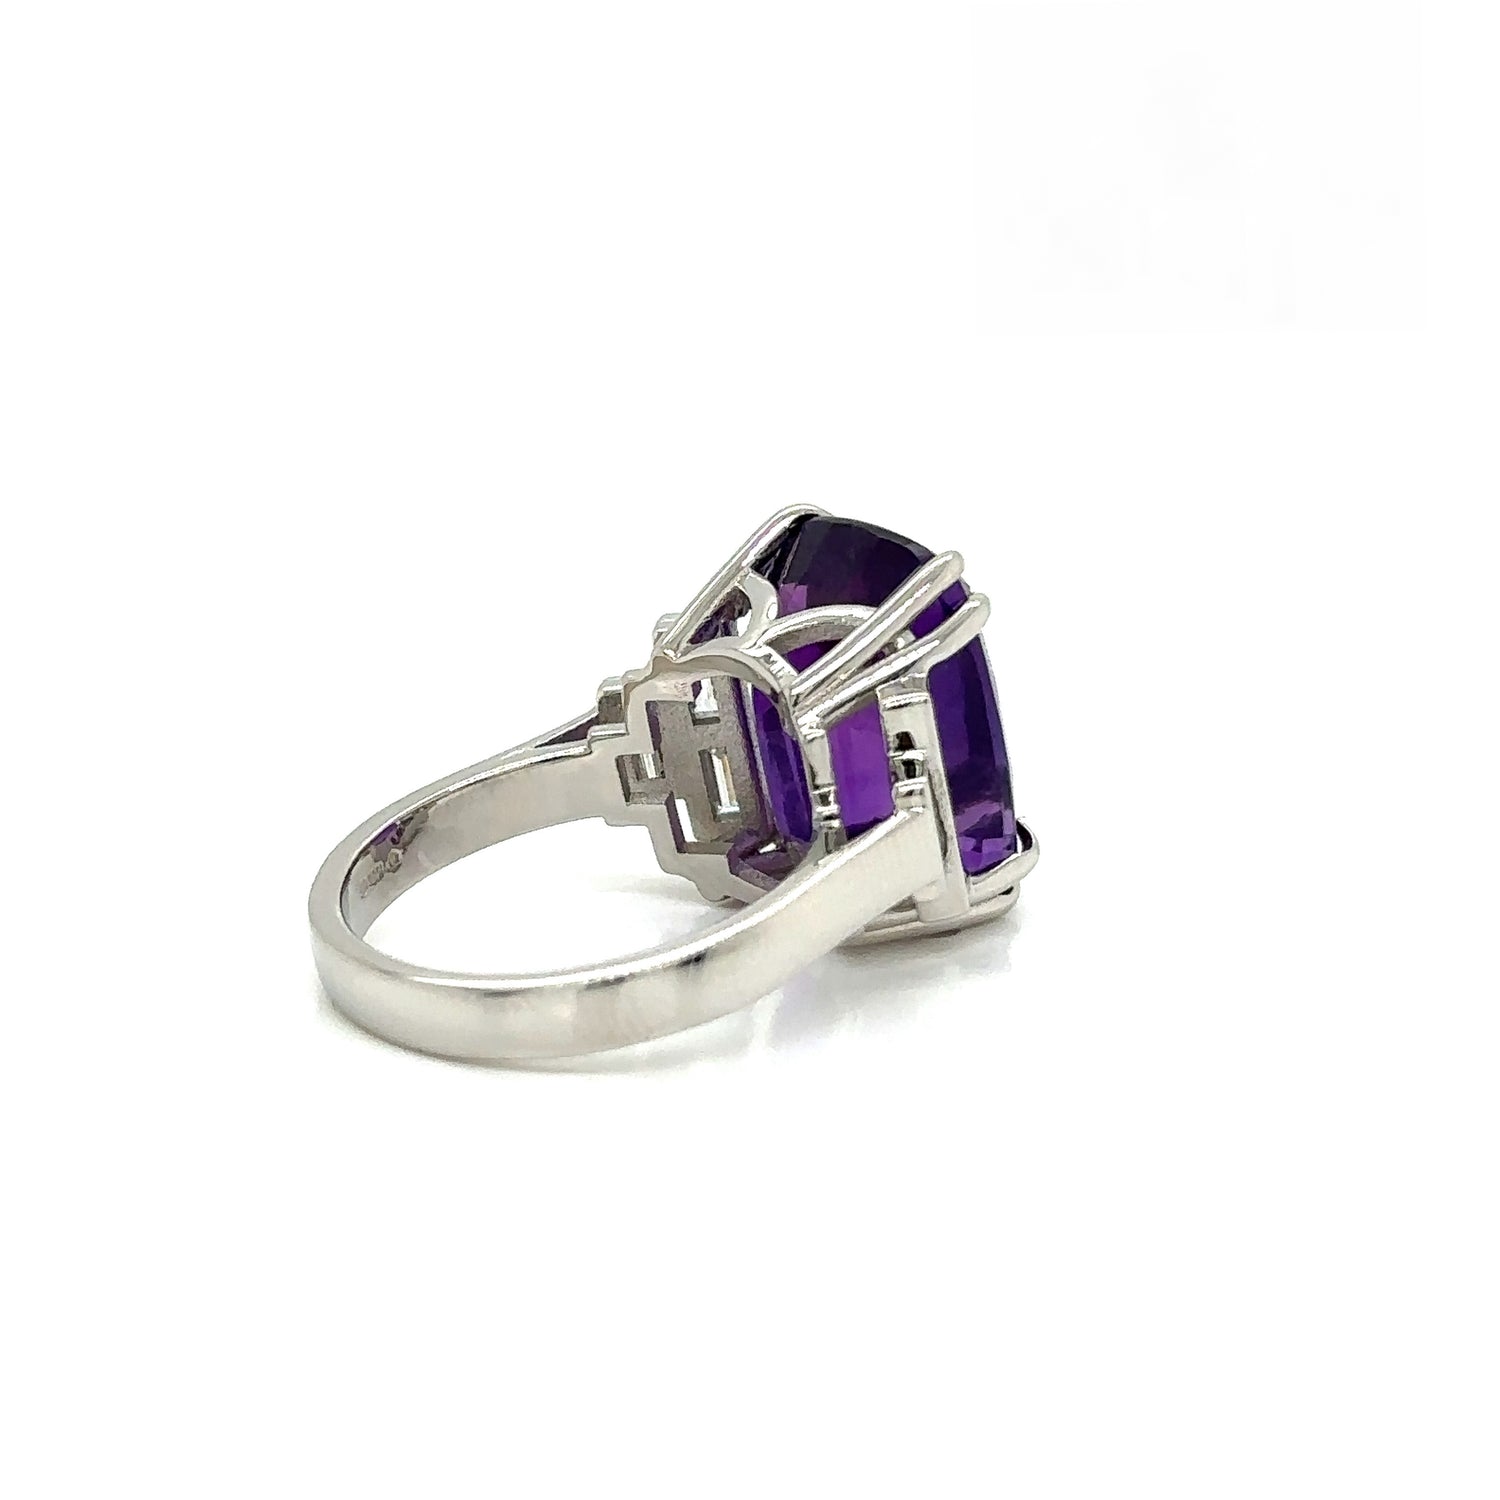 Amethyst and Diamond Ring with Platinum